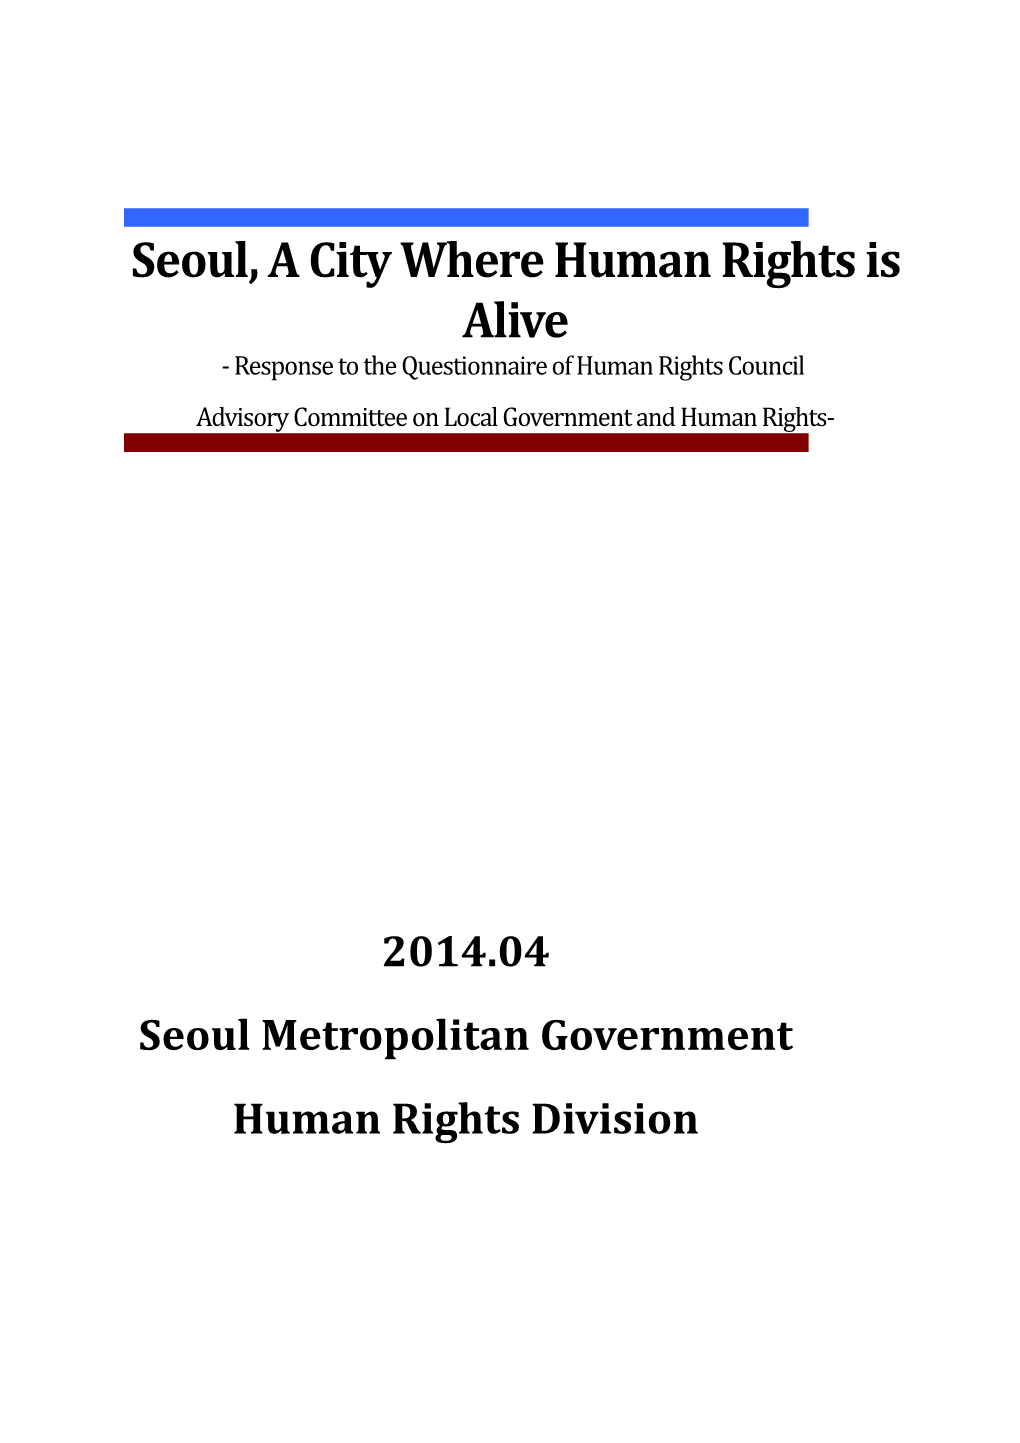 Answer to Question 1.Initiating Human Rights Implementation and Mainstreaming in Seoul